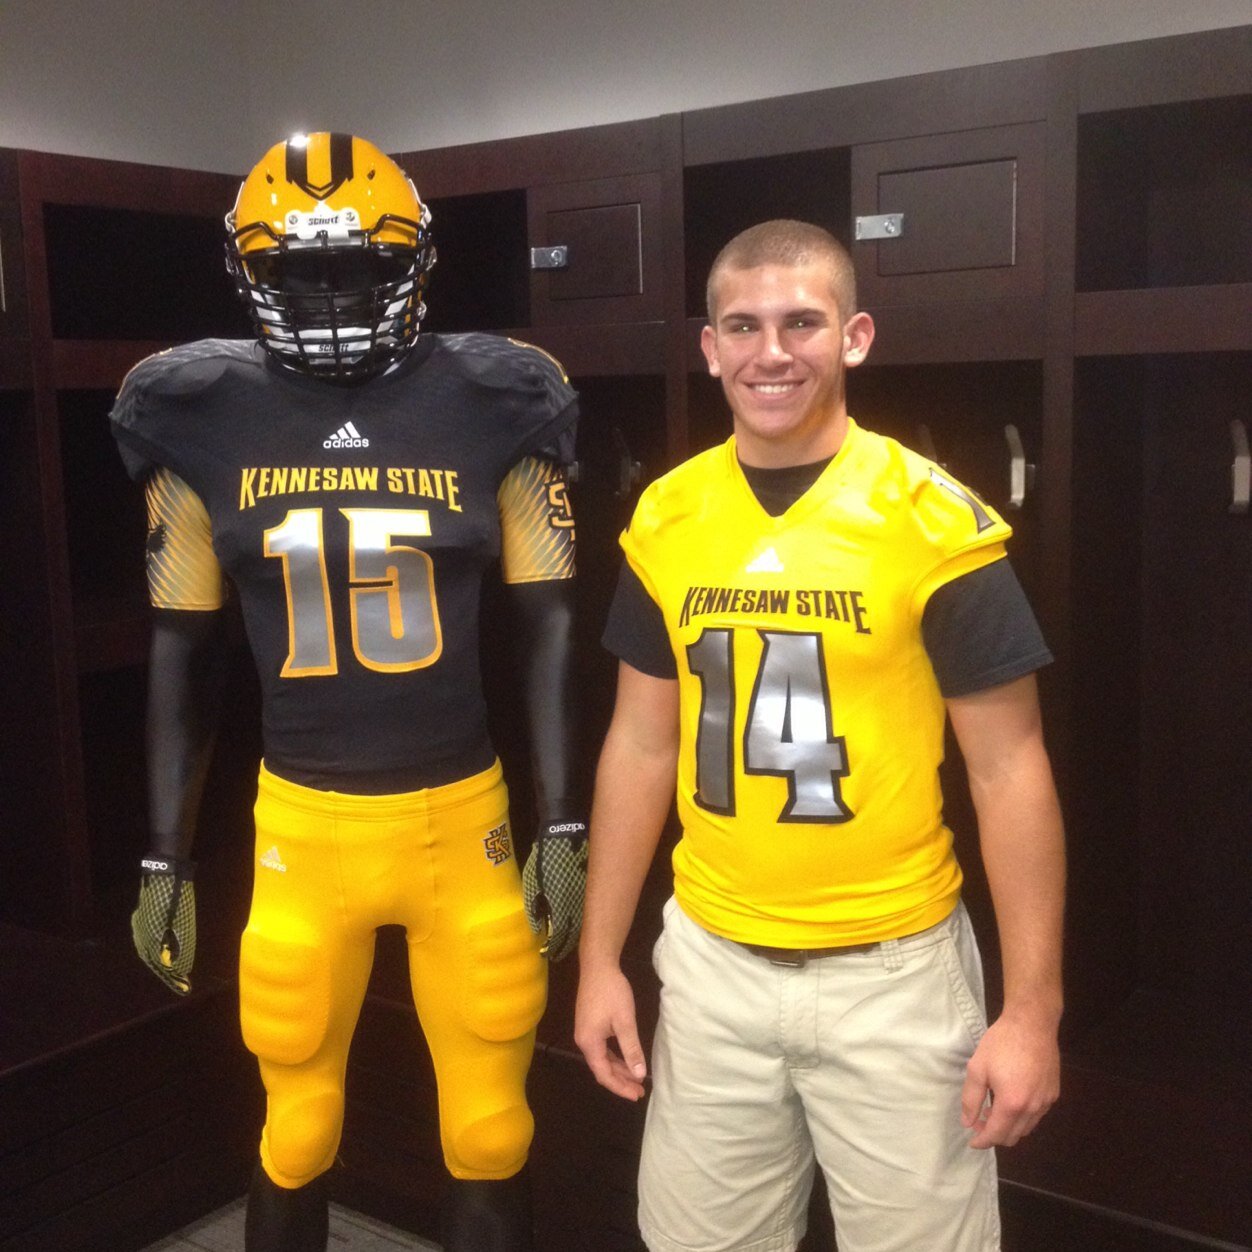 Kennesaw State '15 football uniforms 